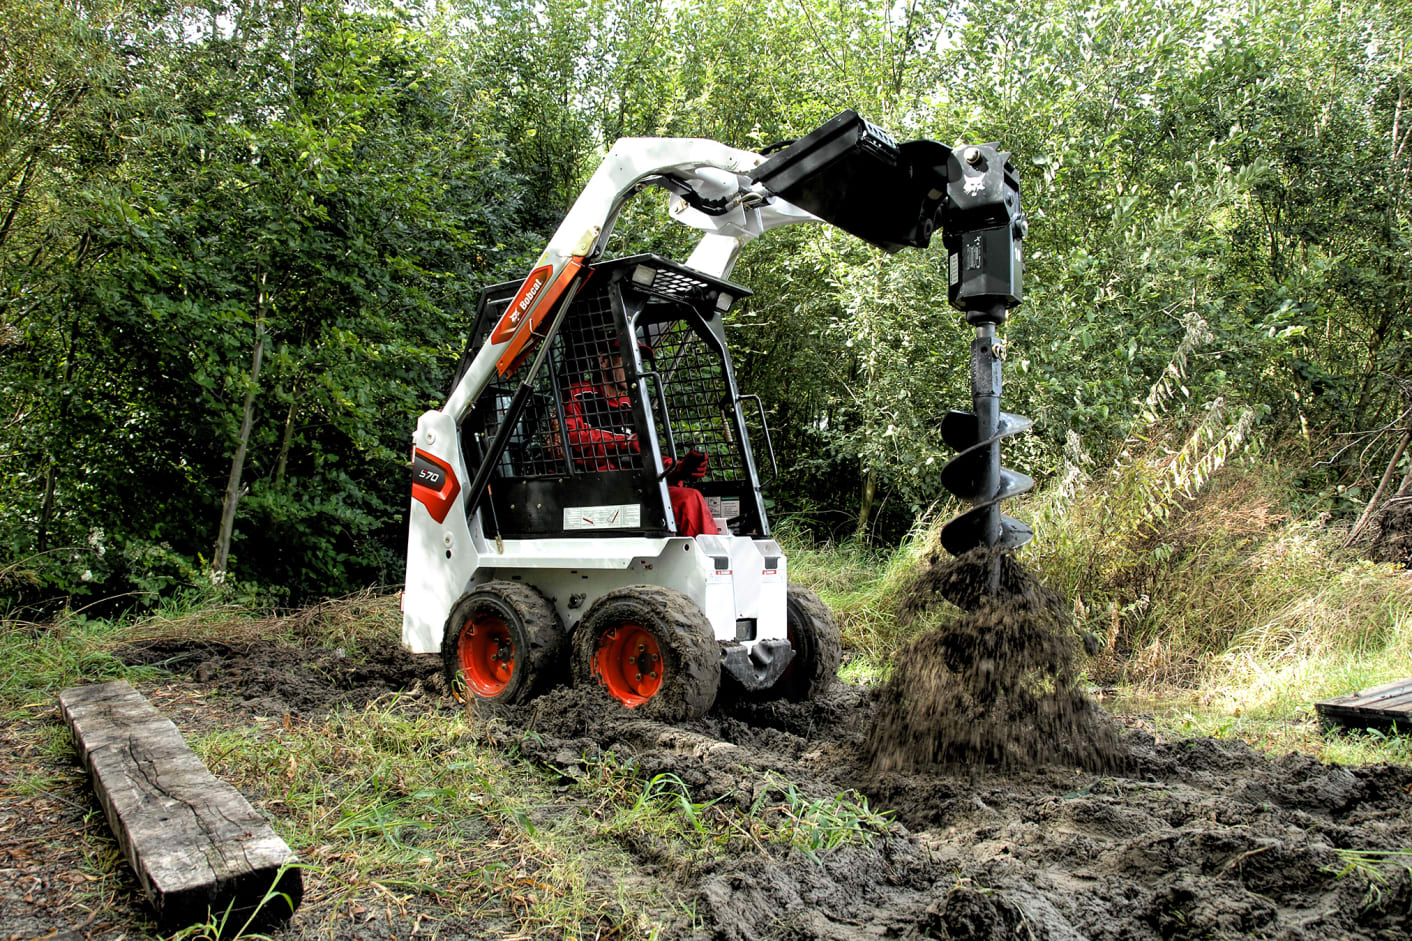 Browse Specs and more for the S70 Skid-Steer Loader - Bobcat of the Rockies